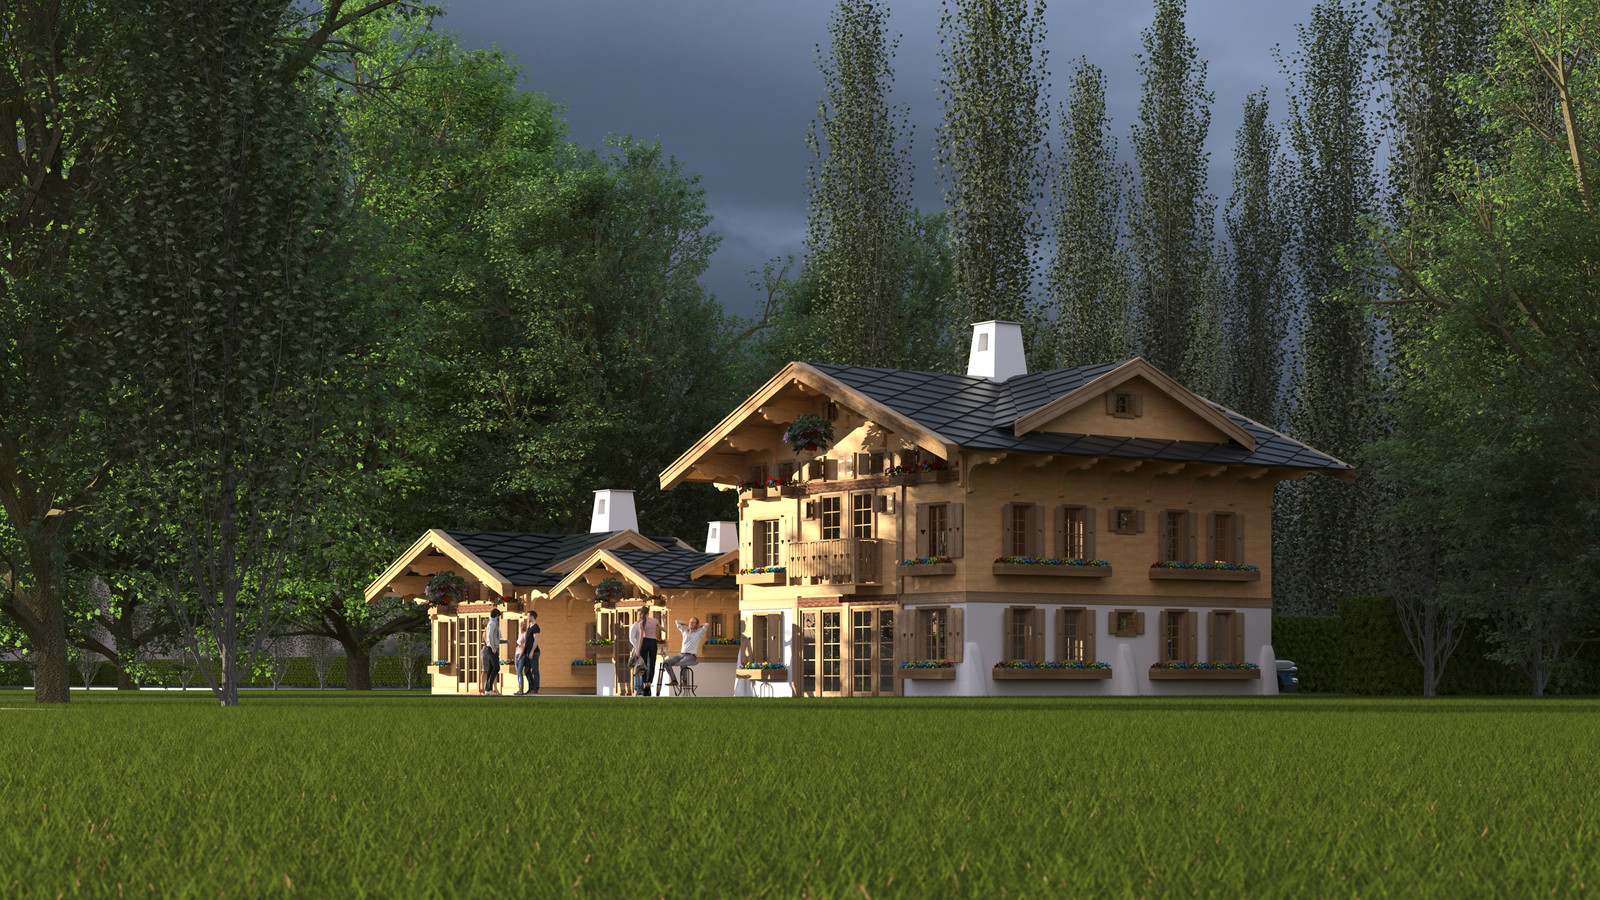 Sketchup 2018 + Thea Render 
This one is just for fun testing Thea 
Chalet large-Scene 6 252 hdr

HDR by HDRI-SKIES​ found here: http://hdri-skies.com/shop/hdri-sky-252/